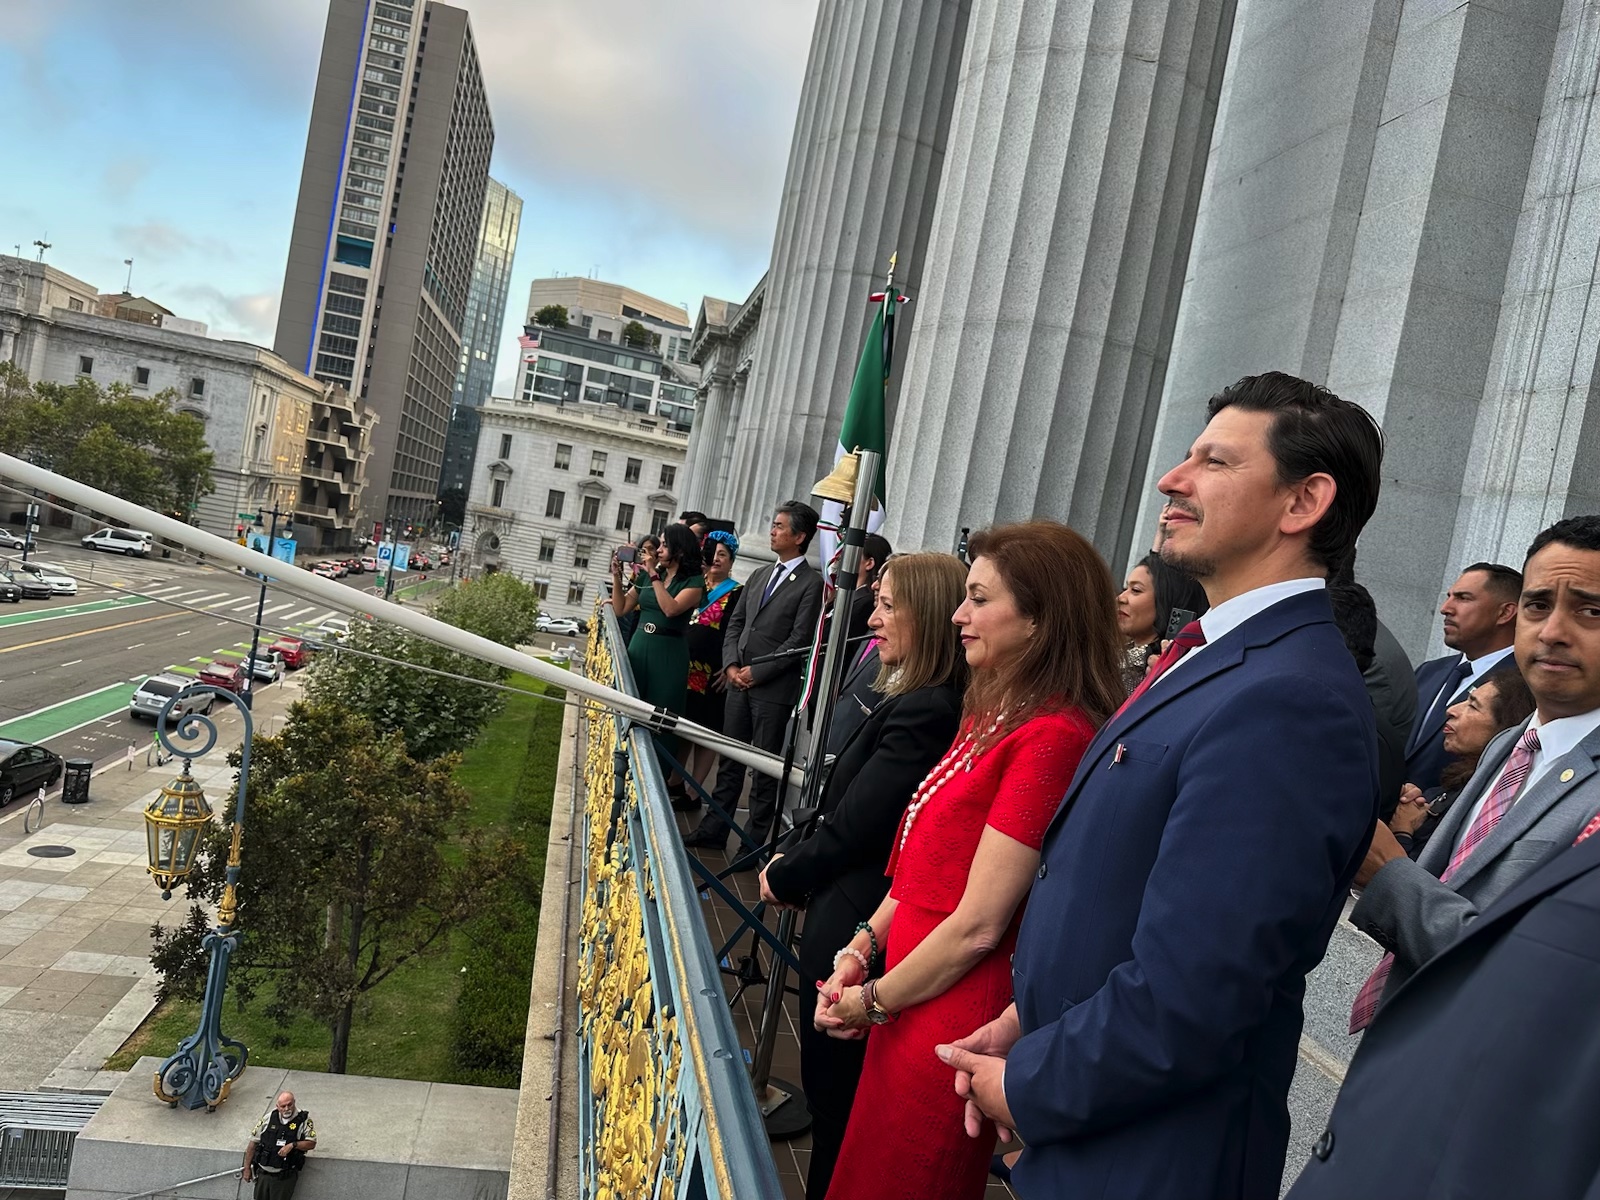 Image of t. Governor Kounalakis with San Francisco Mayor London Breed and Mexico’s Acting Consul General in San Francisco at City Hall to celebrate Mexican Independence Day